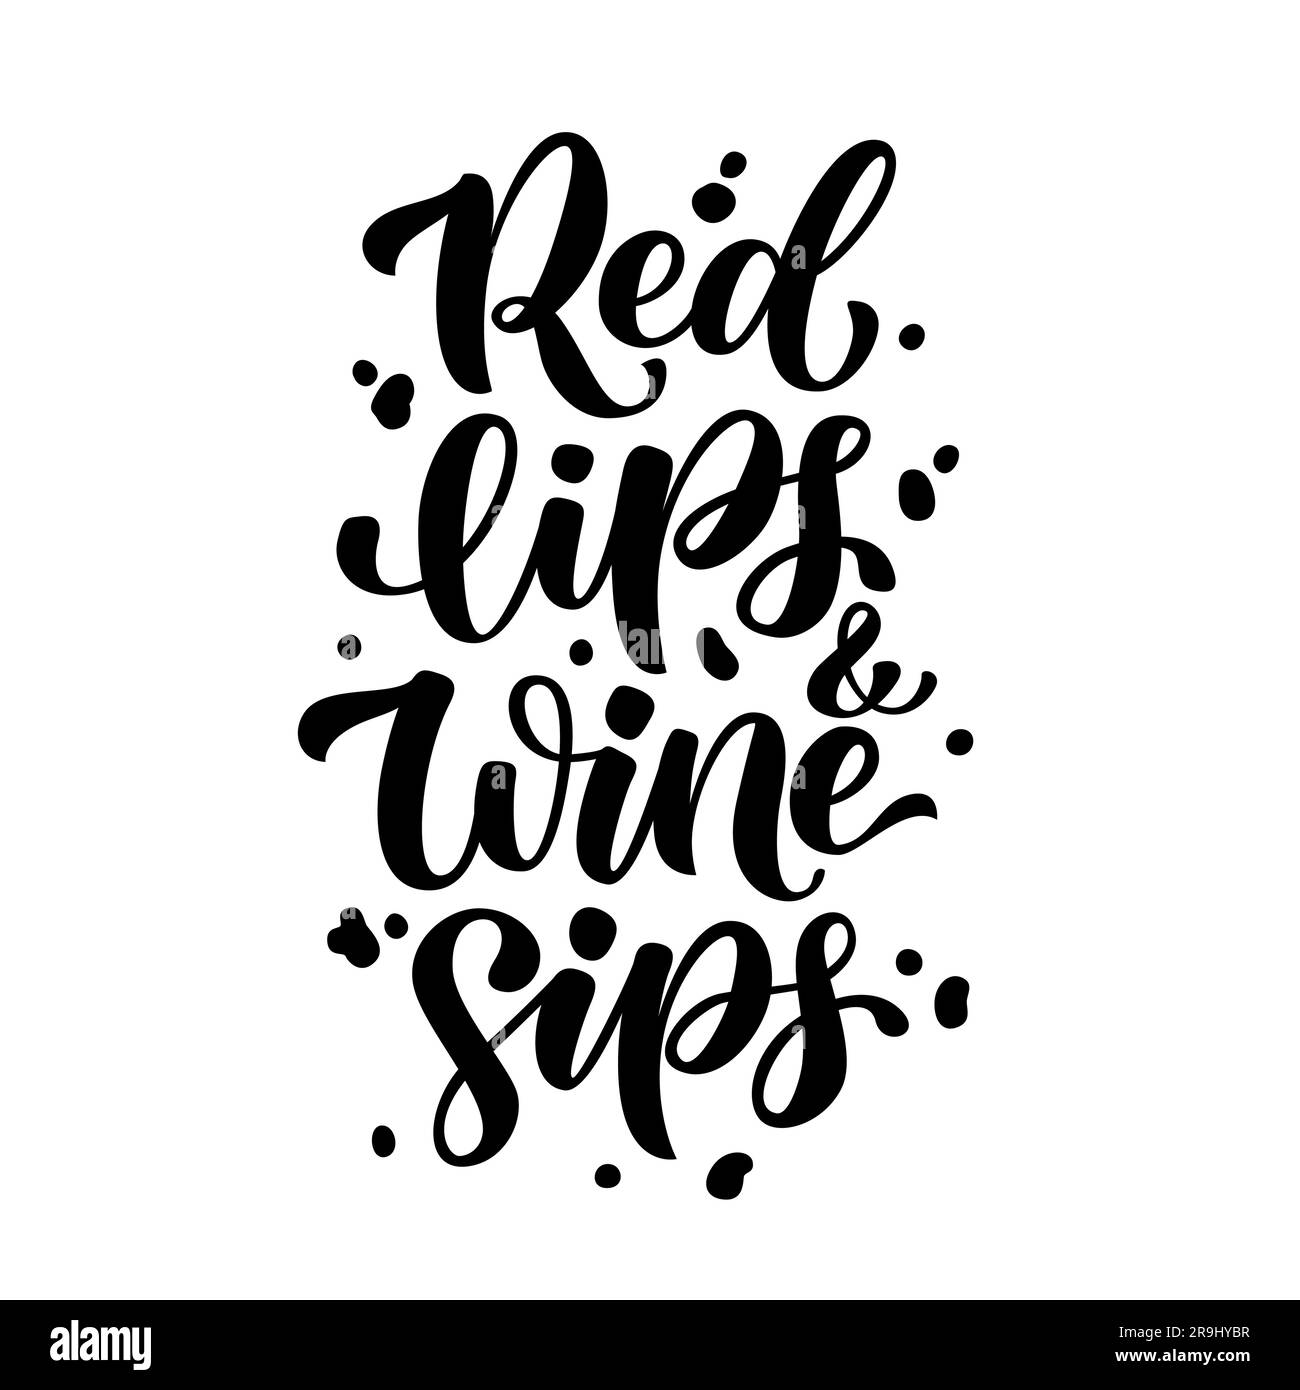 https://c8.alamy.com/comp/2R9HYBR/red-lips-and-wine-sips-fun-quote-for-wine-party-cheers-red-lips-and-wine-sips-text-wine-quote-vector-illustration-graphic-design-for-print-poster-2R9HYBR.jpg